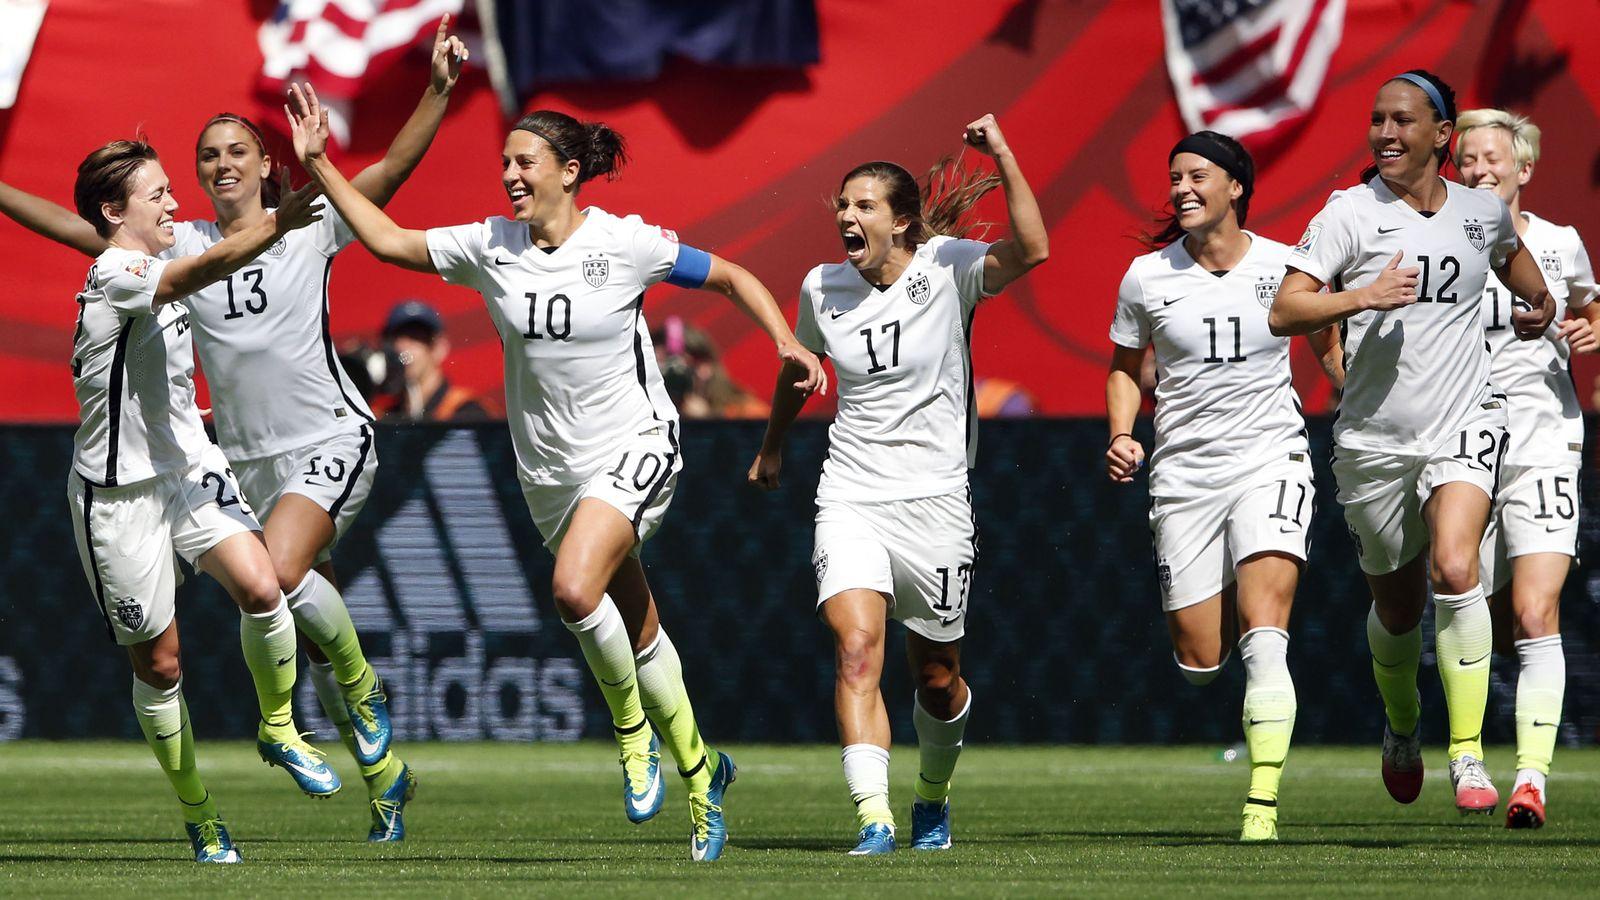 Collection of Uswnt Wallpaper (image in Collection)